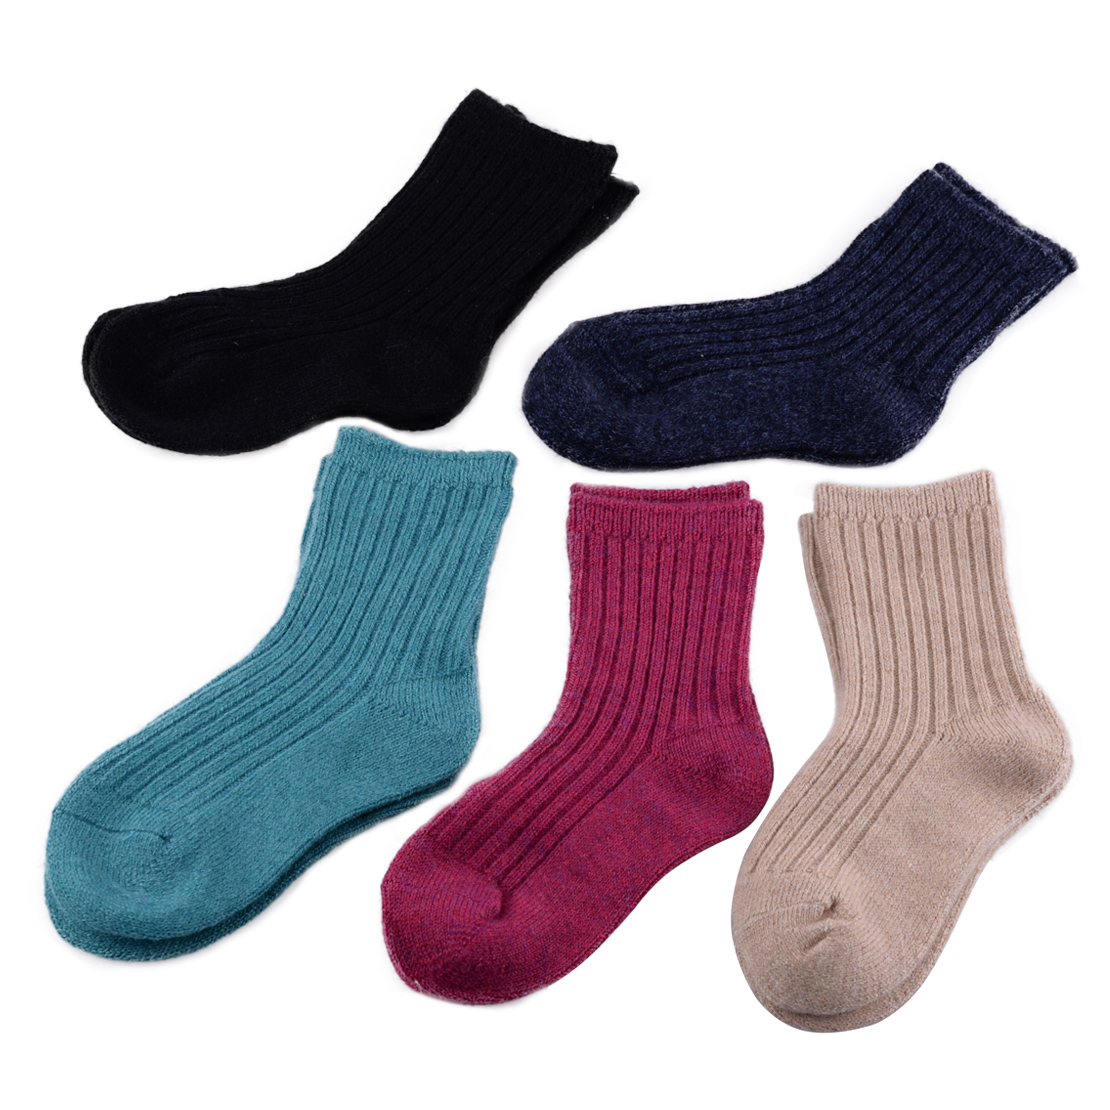 5 Pairs Lot Baby Toddler Boys/Girls Kid 98% Cashmere Wool Thick Warm Soft Socks 